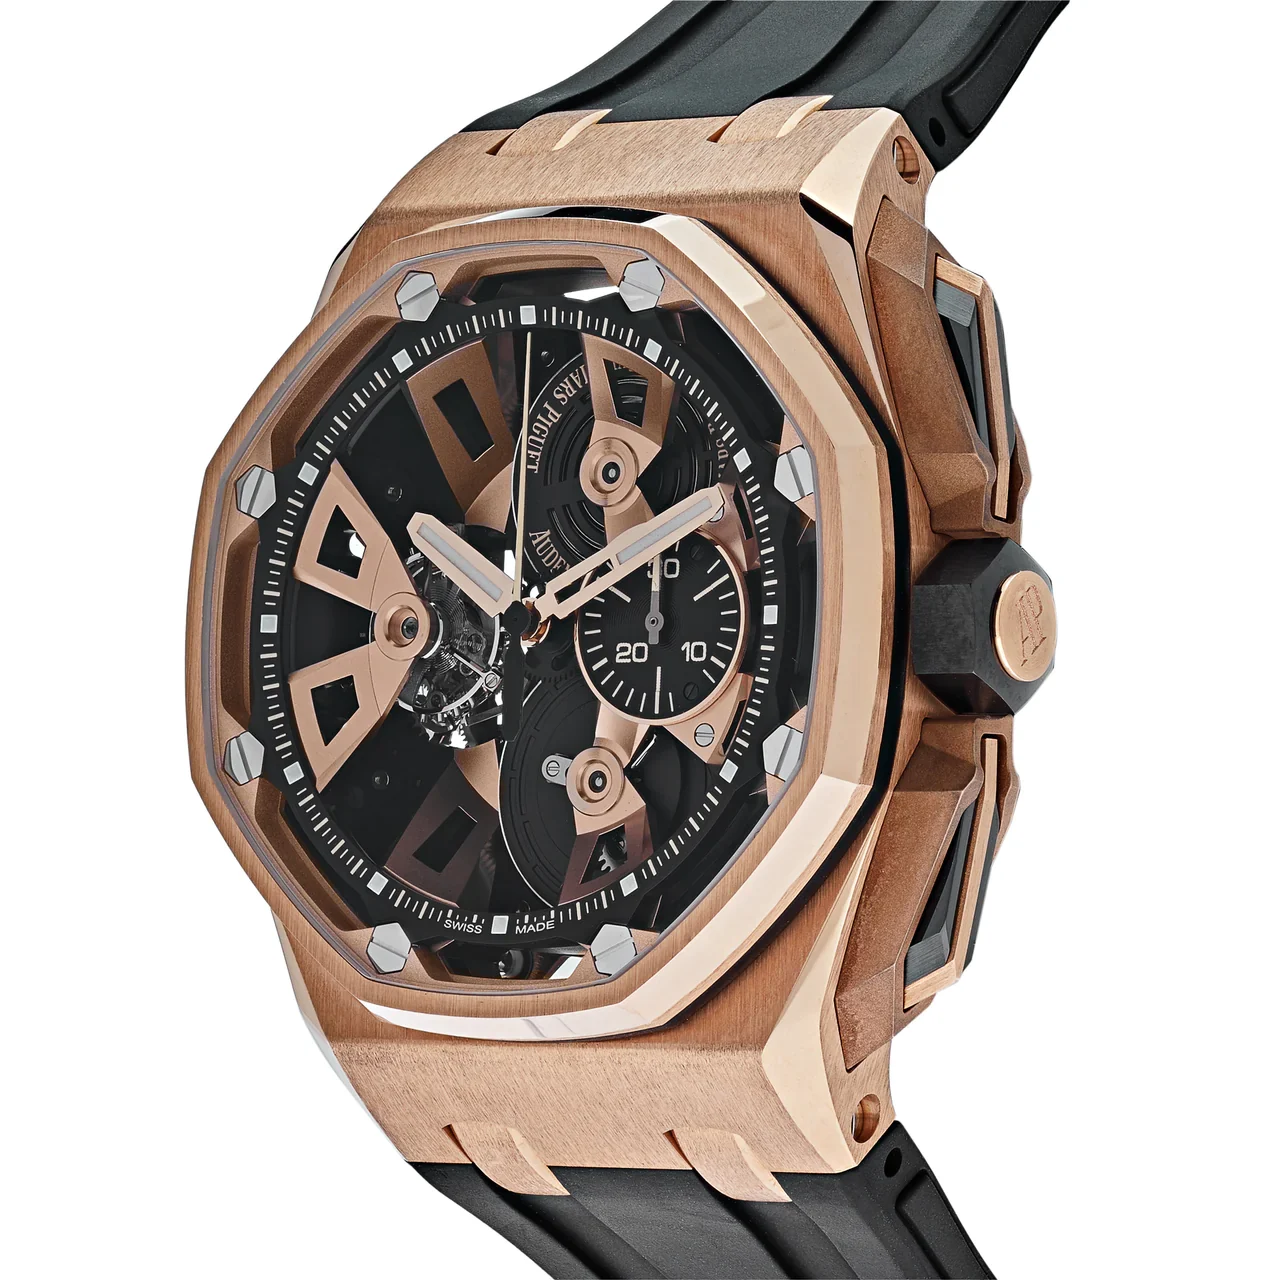 Audemars Piguet Royal Oak Offshore Tourbillon Chronograph 45 Rose Gold - Offshore 25th Anniversary - Limited to 50 Pieces 26421OR.OO.A002CA.01 Listing Image 2